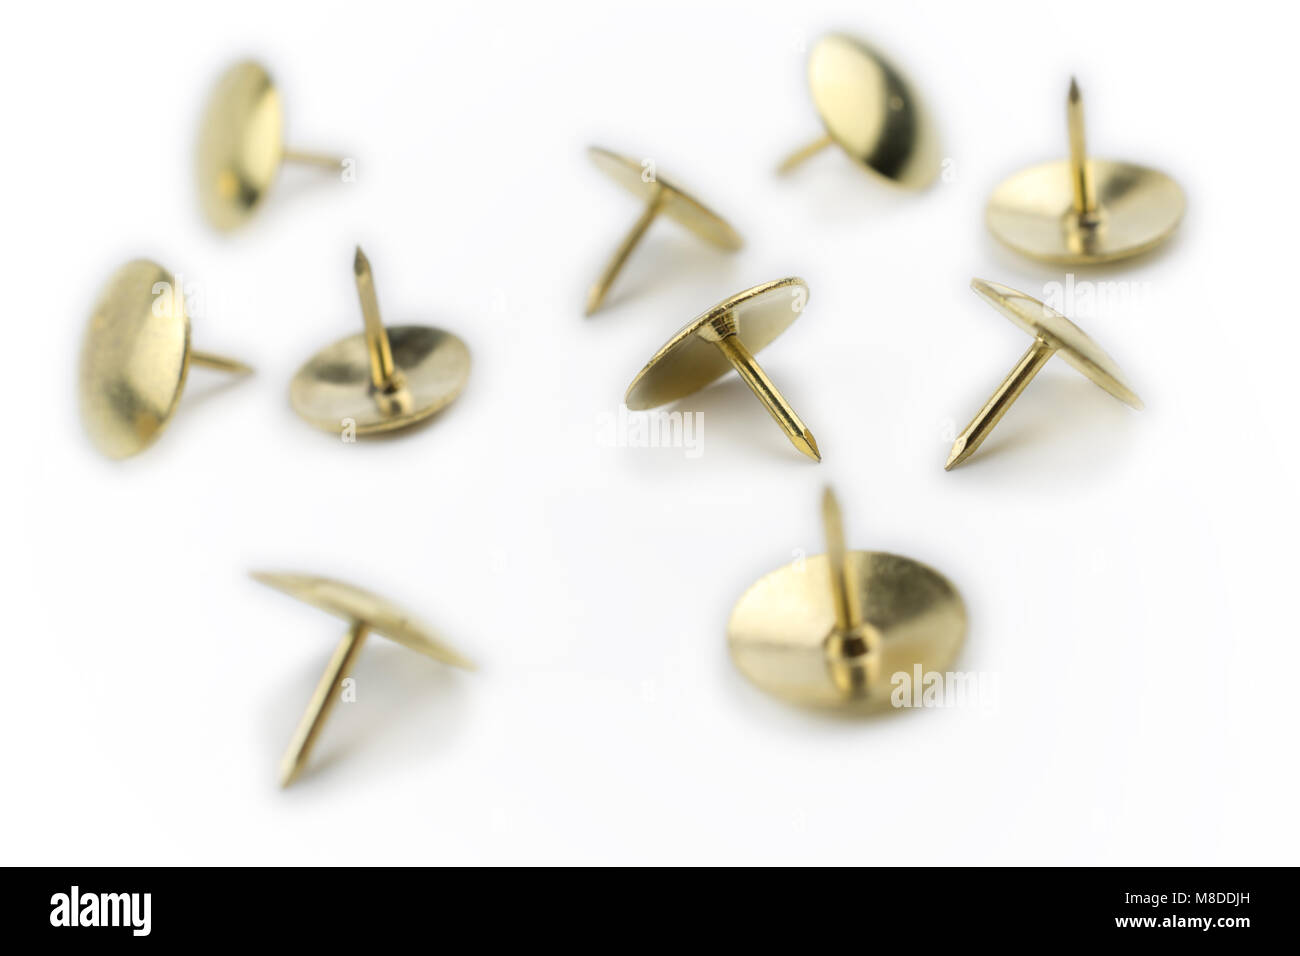 A Small Collection of Thumbtacks In A White Box #2 Stock Photo - Alamy